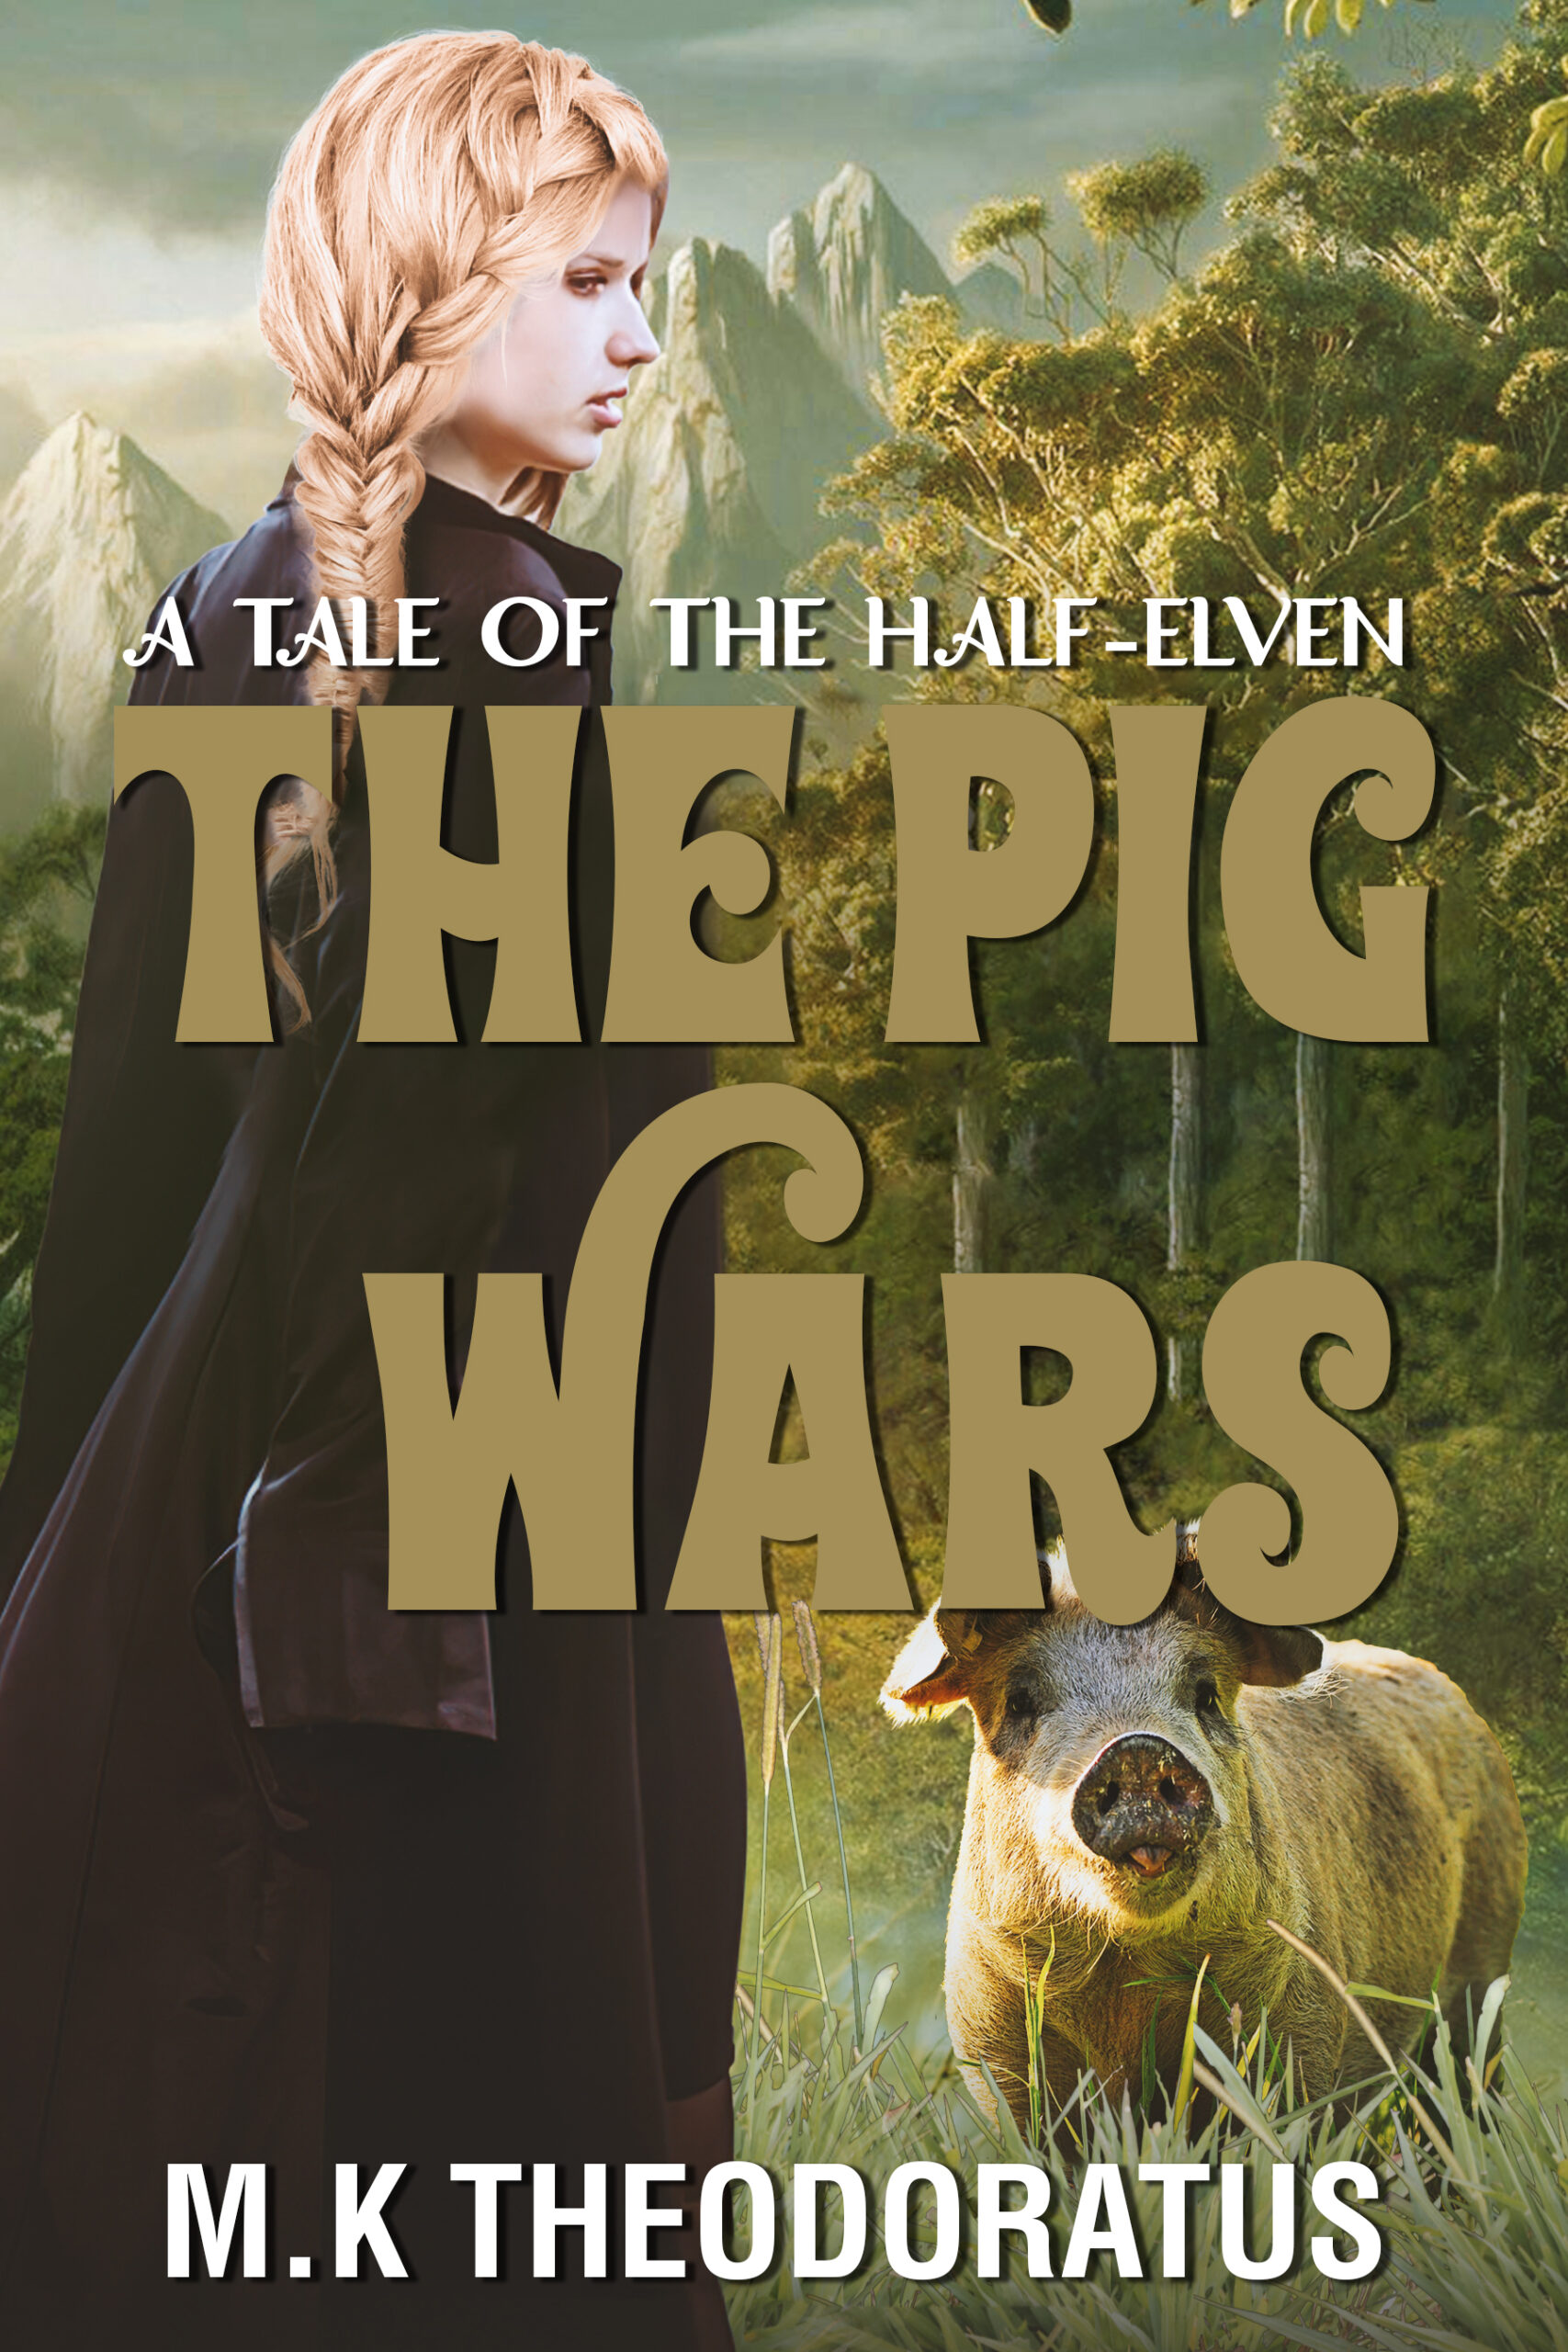 FREE: The Pig Wars: A Tale of the Half-Elven by M. K. Theodoratus